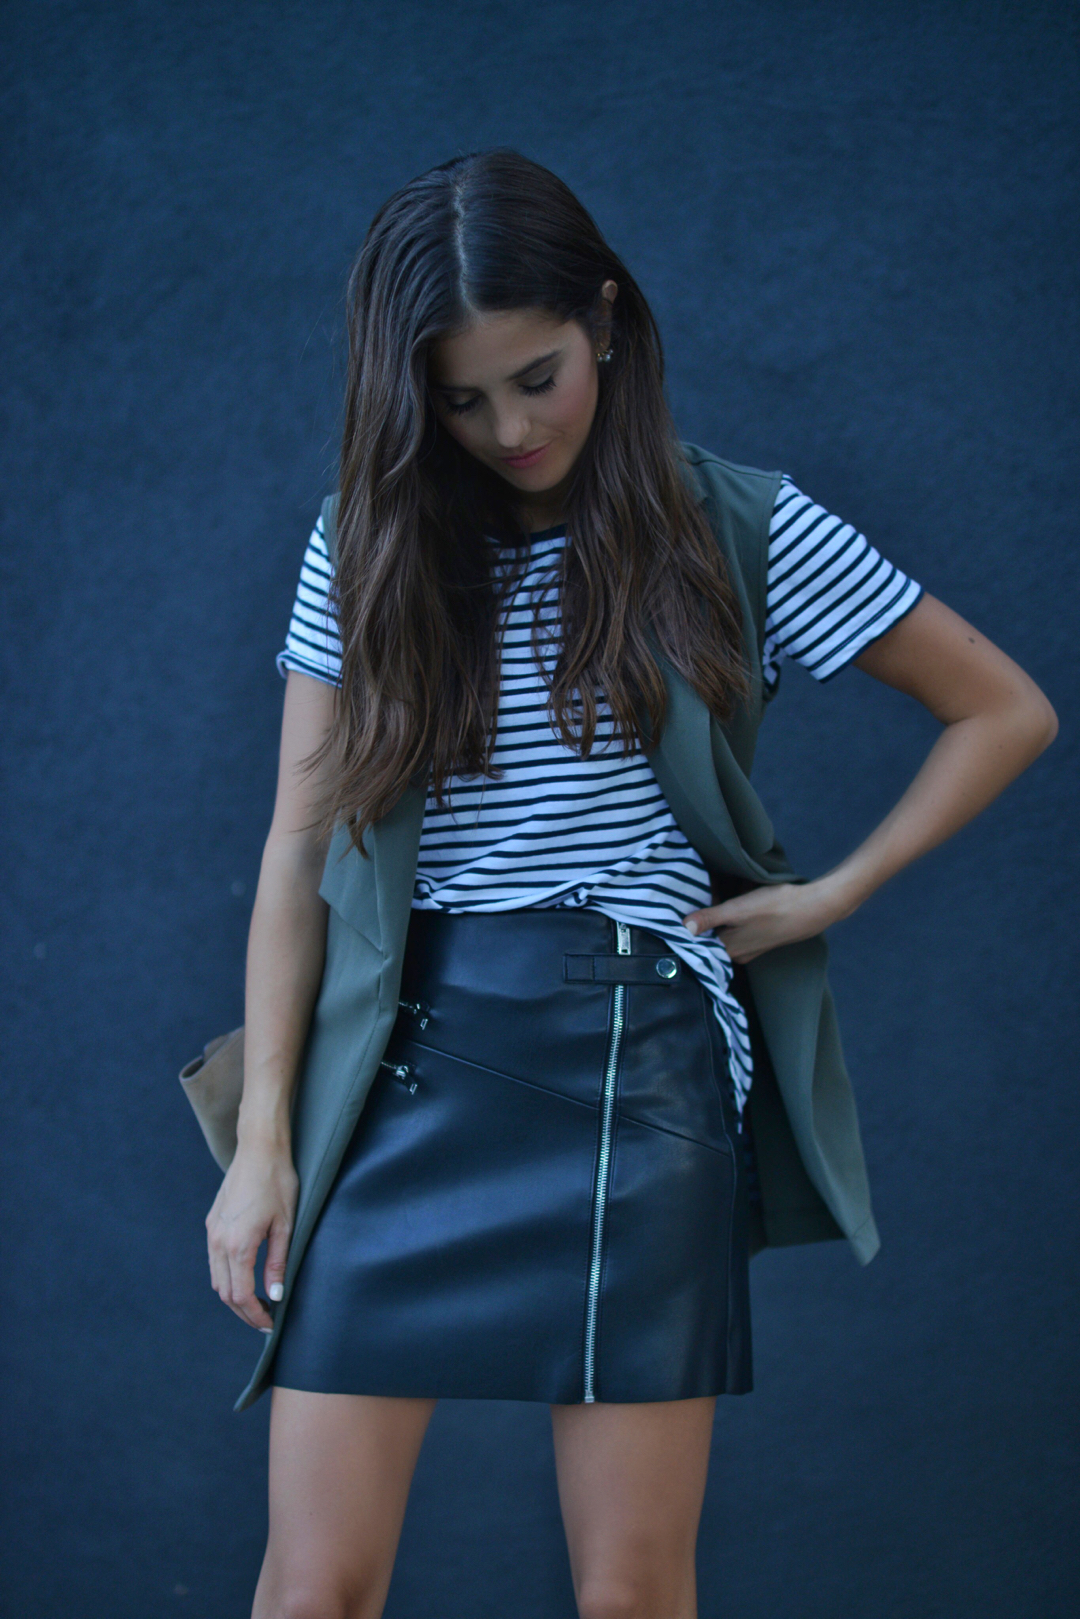 blank_itinerary_stripes_leather - 8